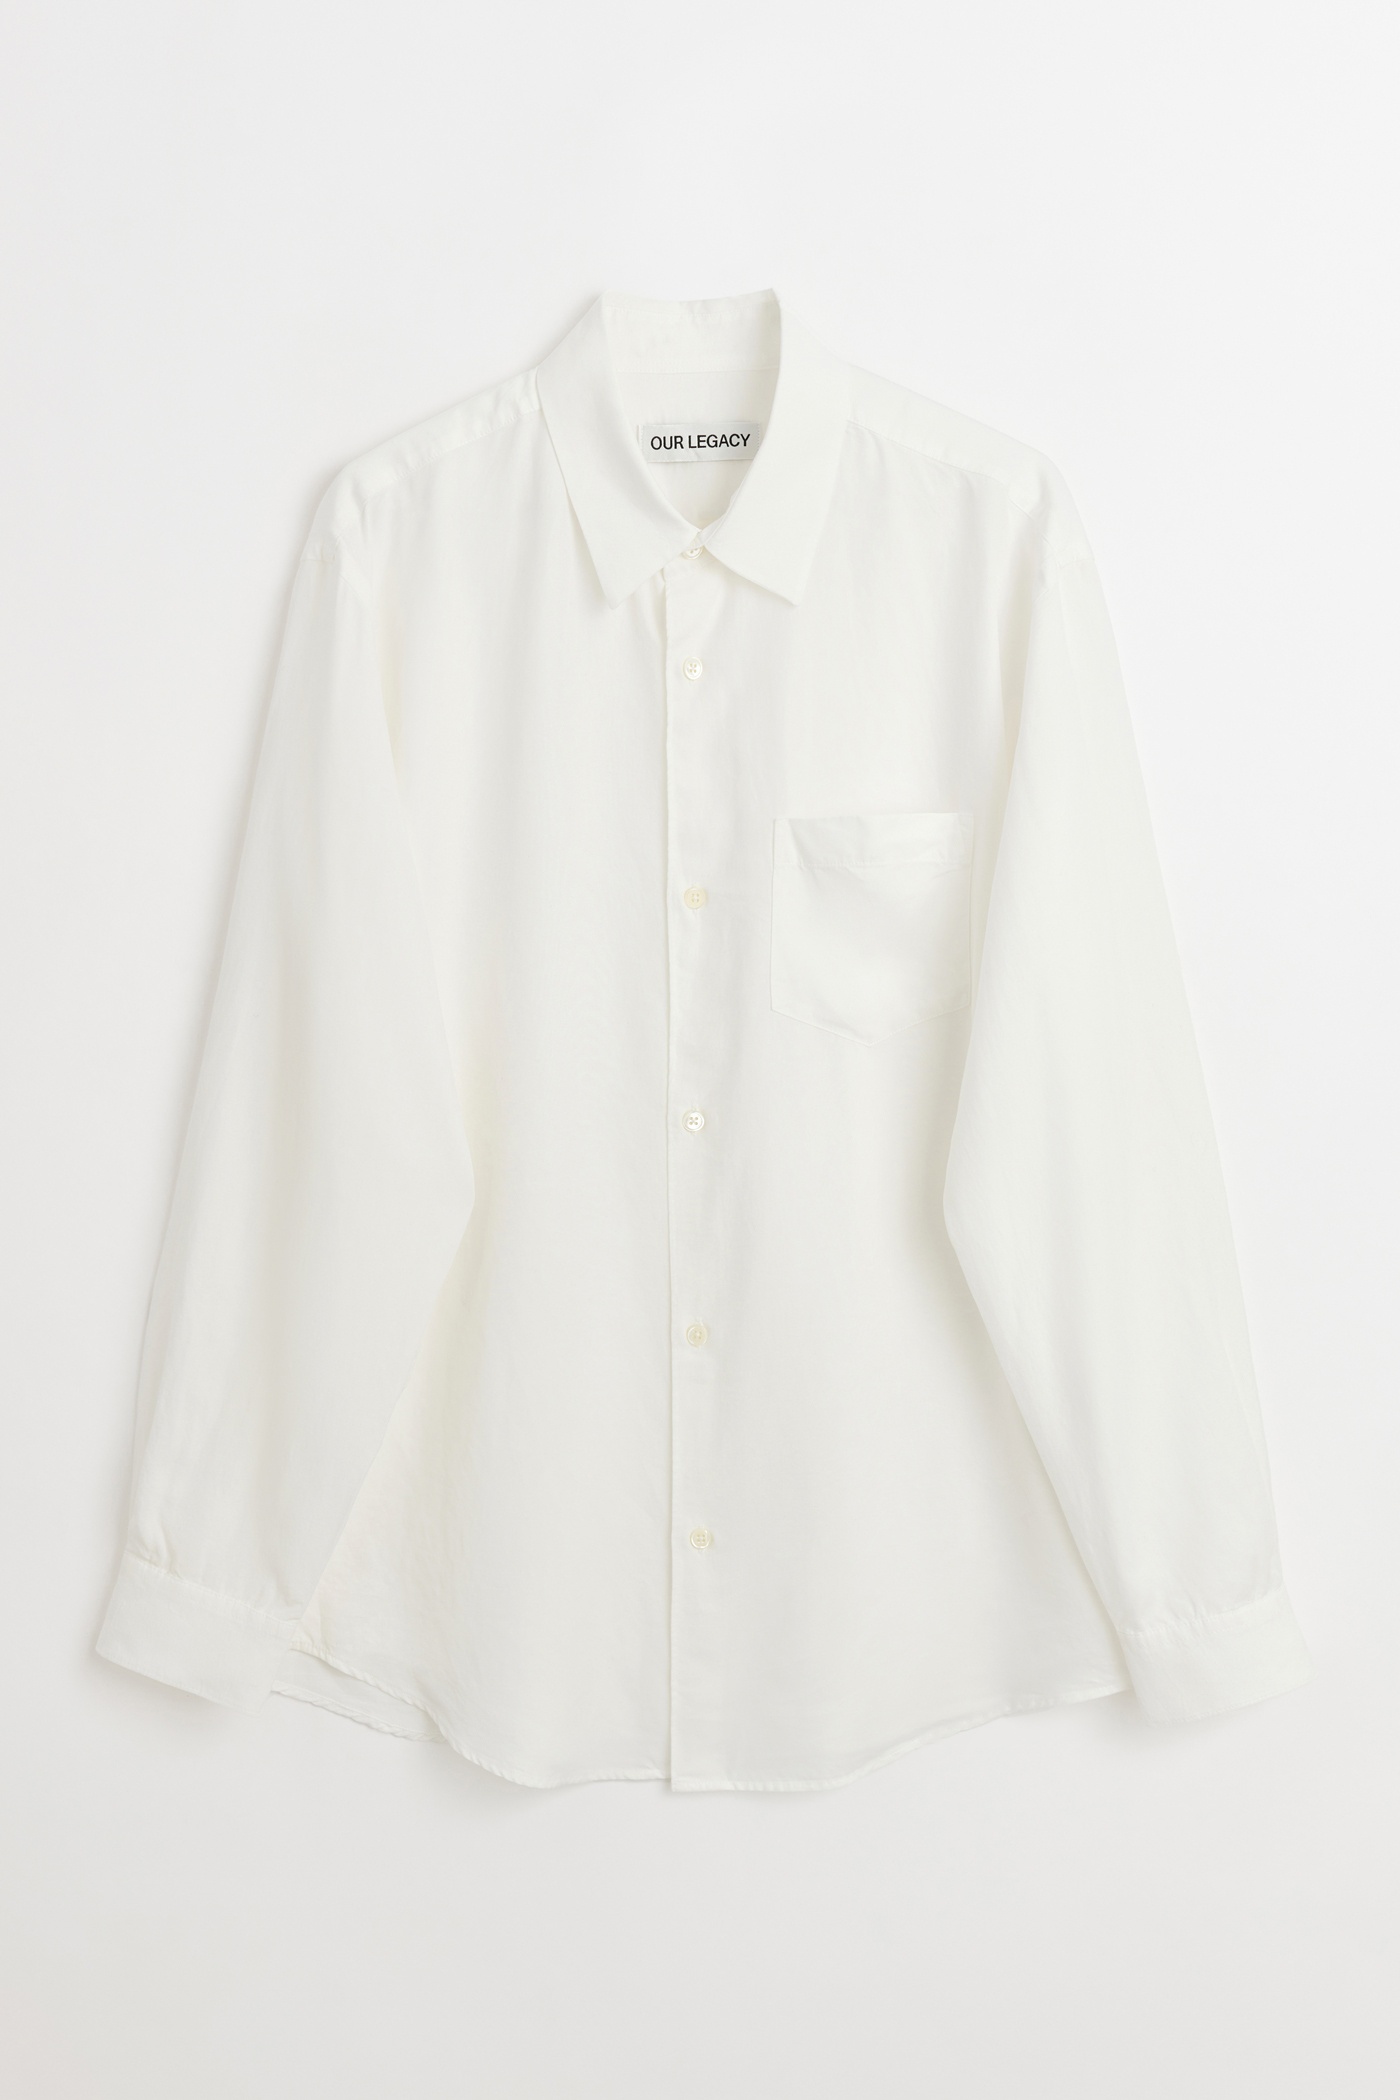 Initial Shirt Off White Lyocell - 1